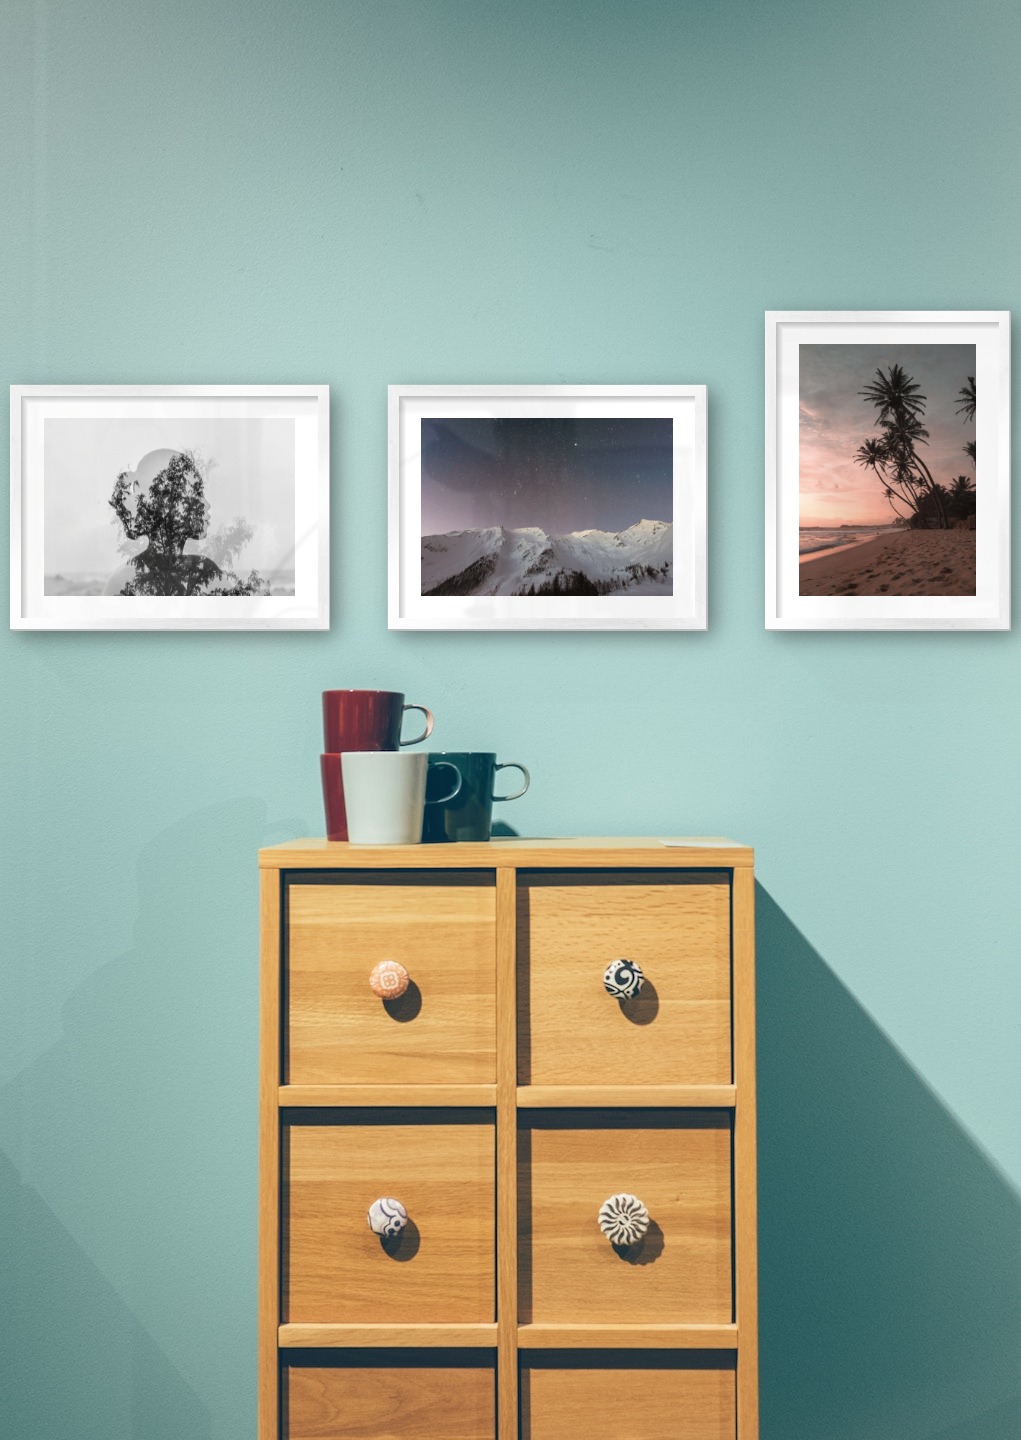 Gallery wall with picture frames in silver in sizes 30x40 with prints "Trees and silhouette", "Mountains with night sky" and "Beach at sunset"